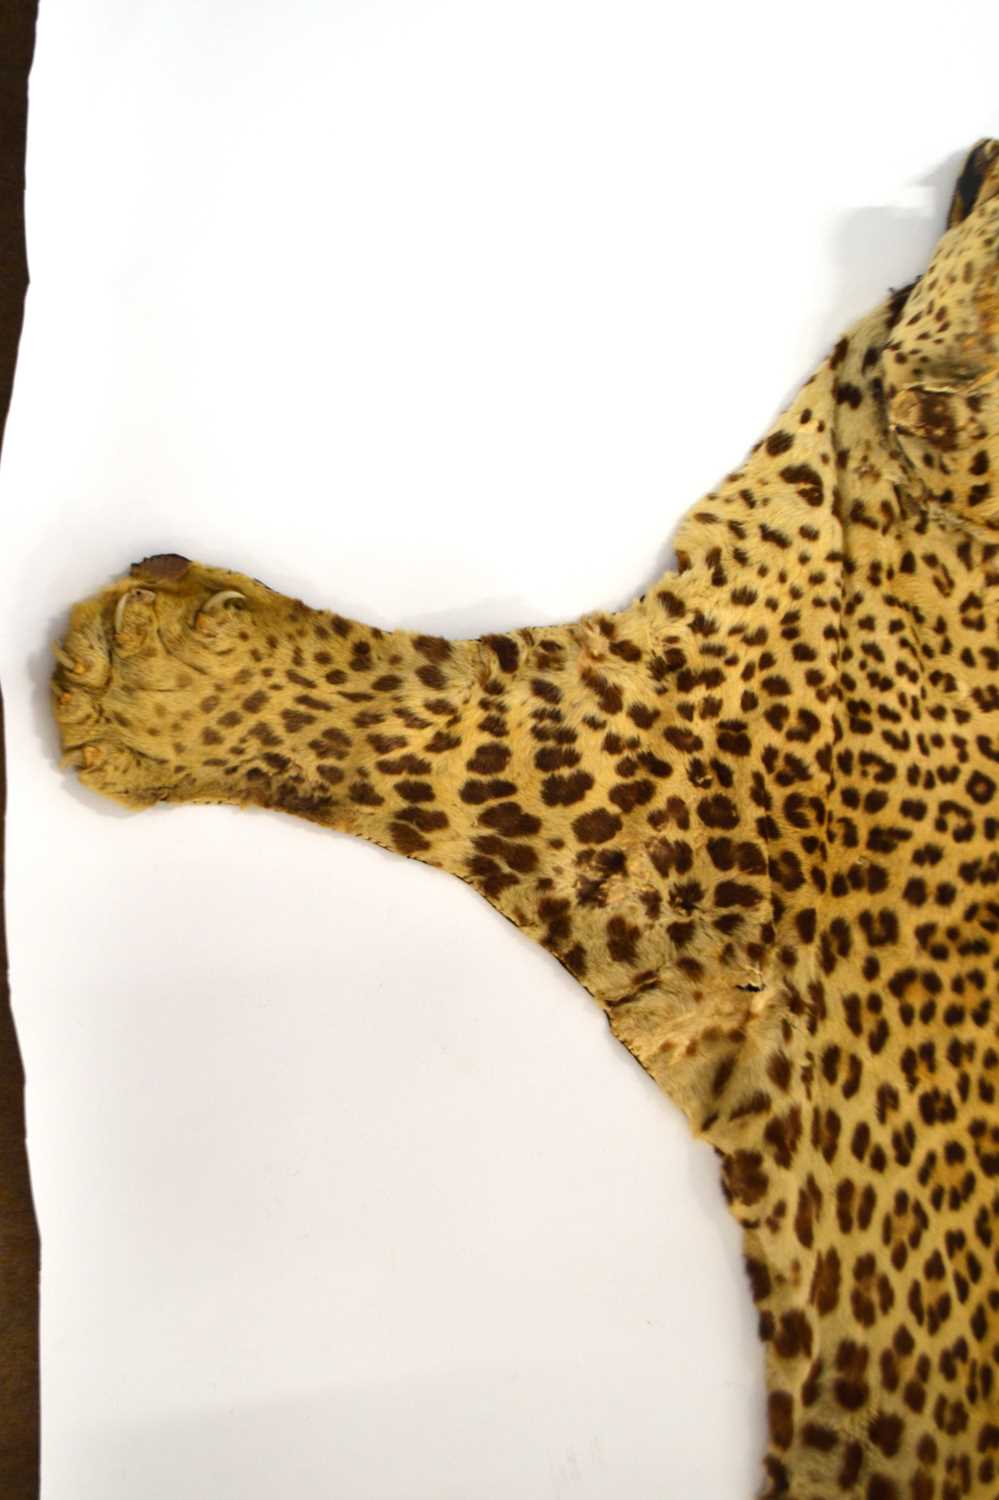 20th Century taxidermy leopard skin rug and mount, open gaping mouth head with glass eyes, by - Image 5 of 11